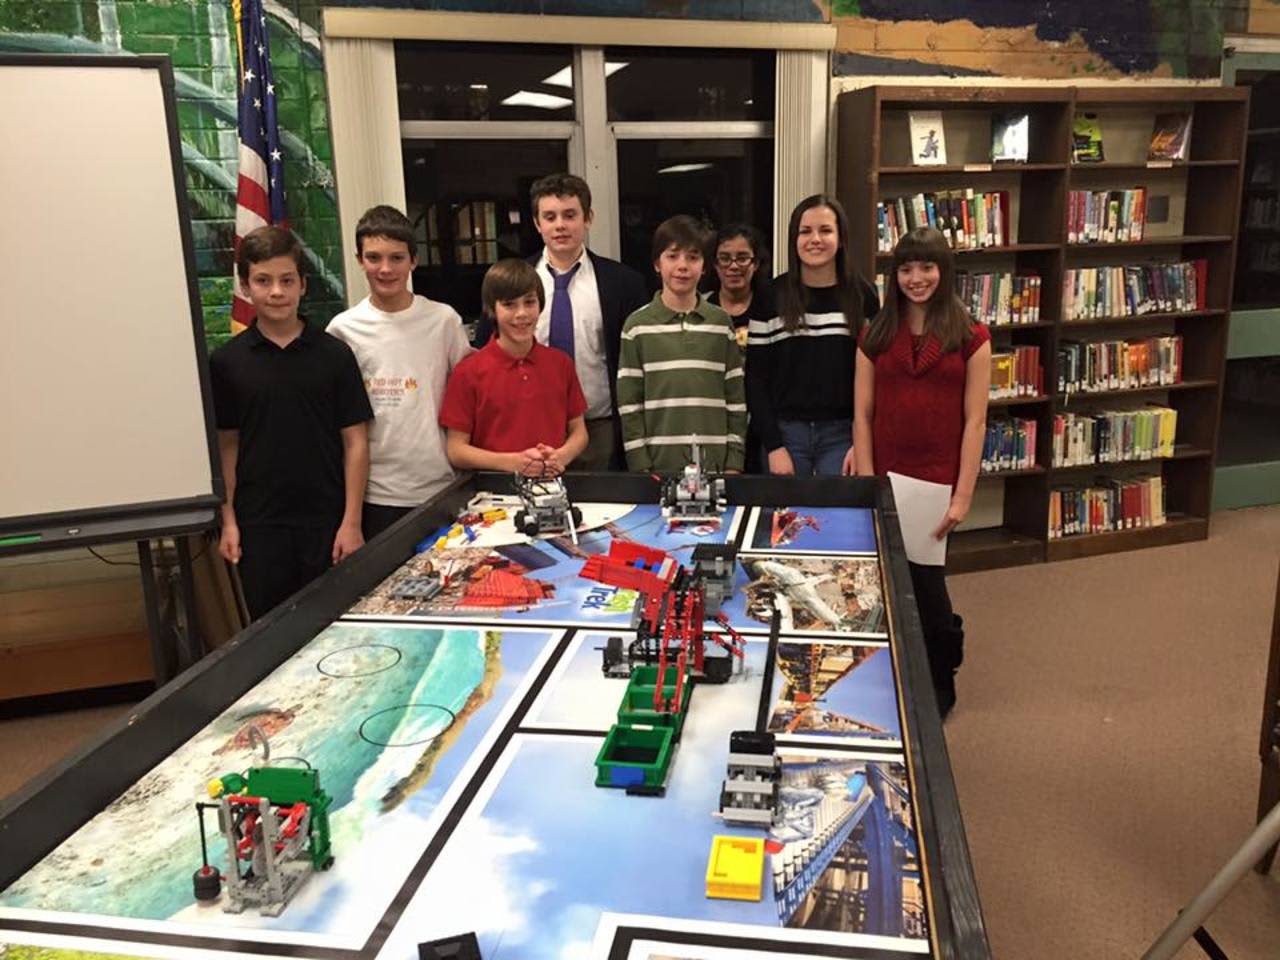 Ringwood students will present Lego robotics at the library Thursday.